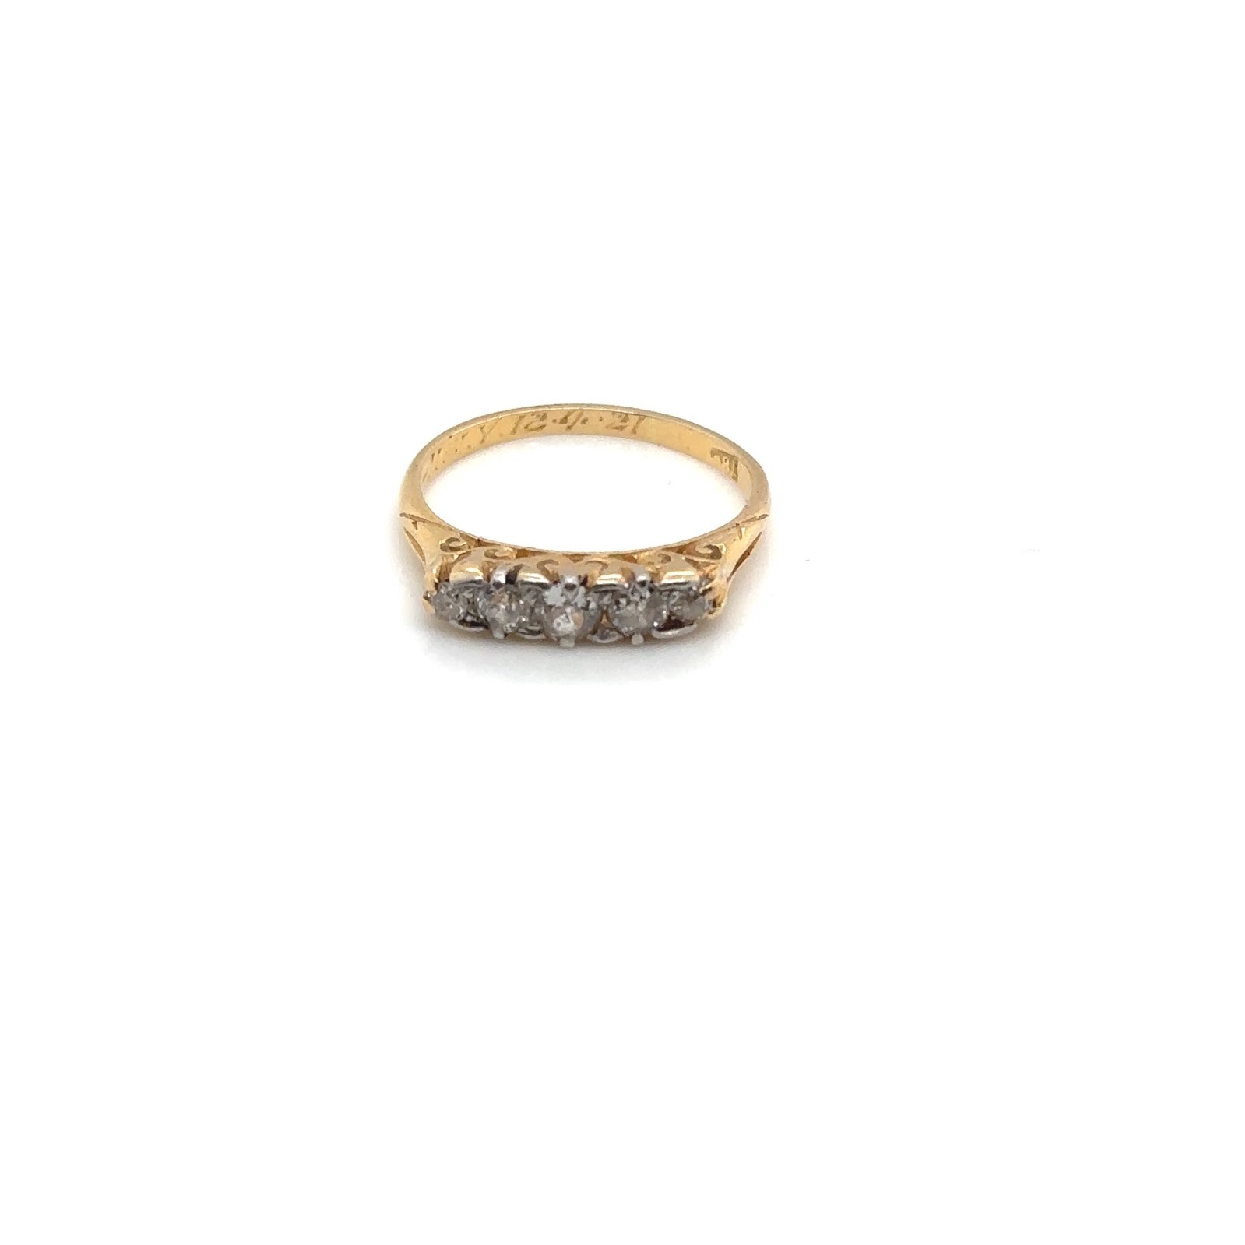 18K Yellow Gold and Diamond Ring 

Size 6.5